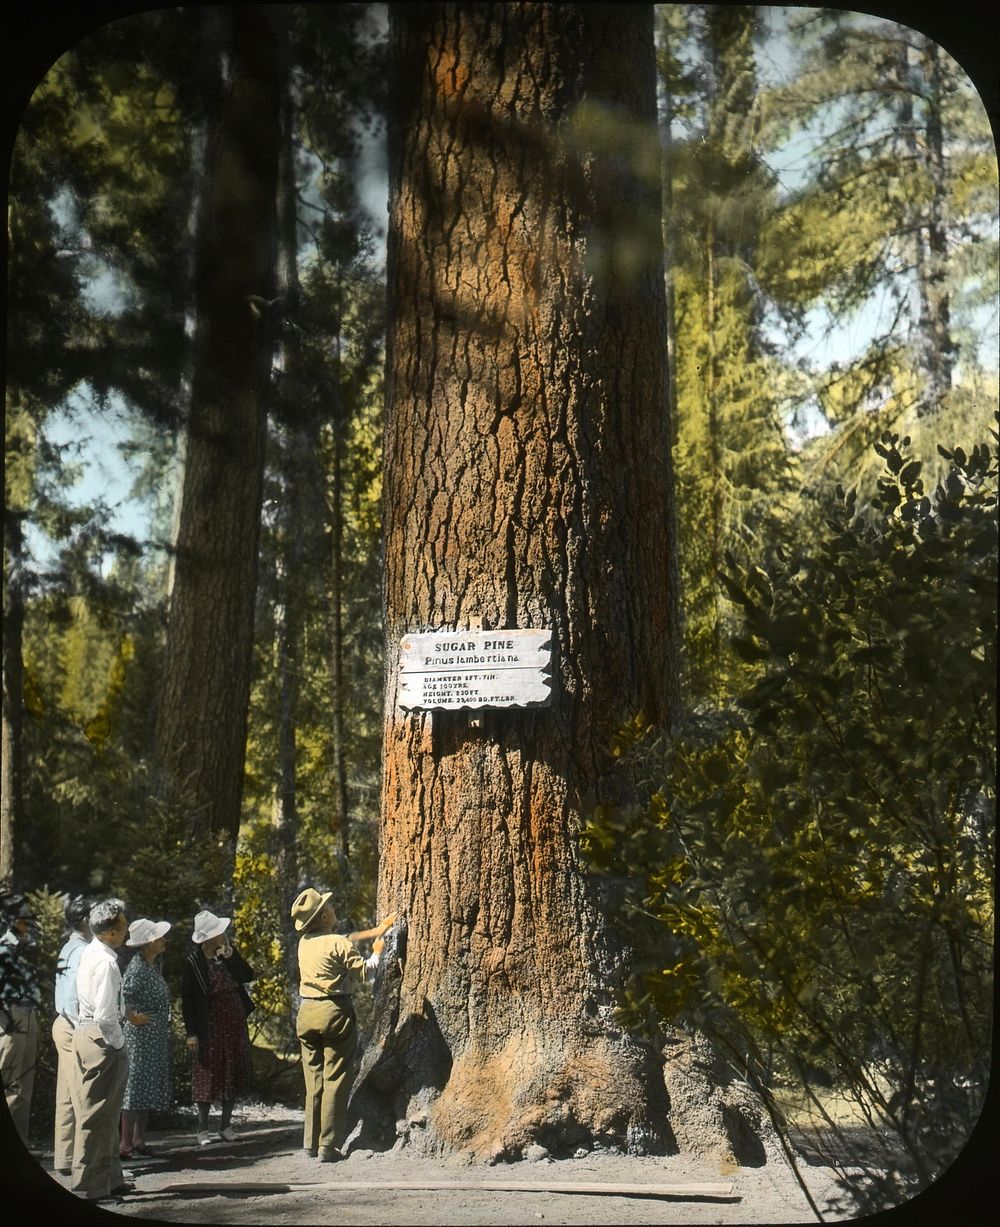 Mammoth S Pine 1941 at Rogue River - Siskiyou National Forest Historic Photo. Original public domain image from Flickr